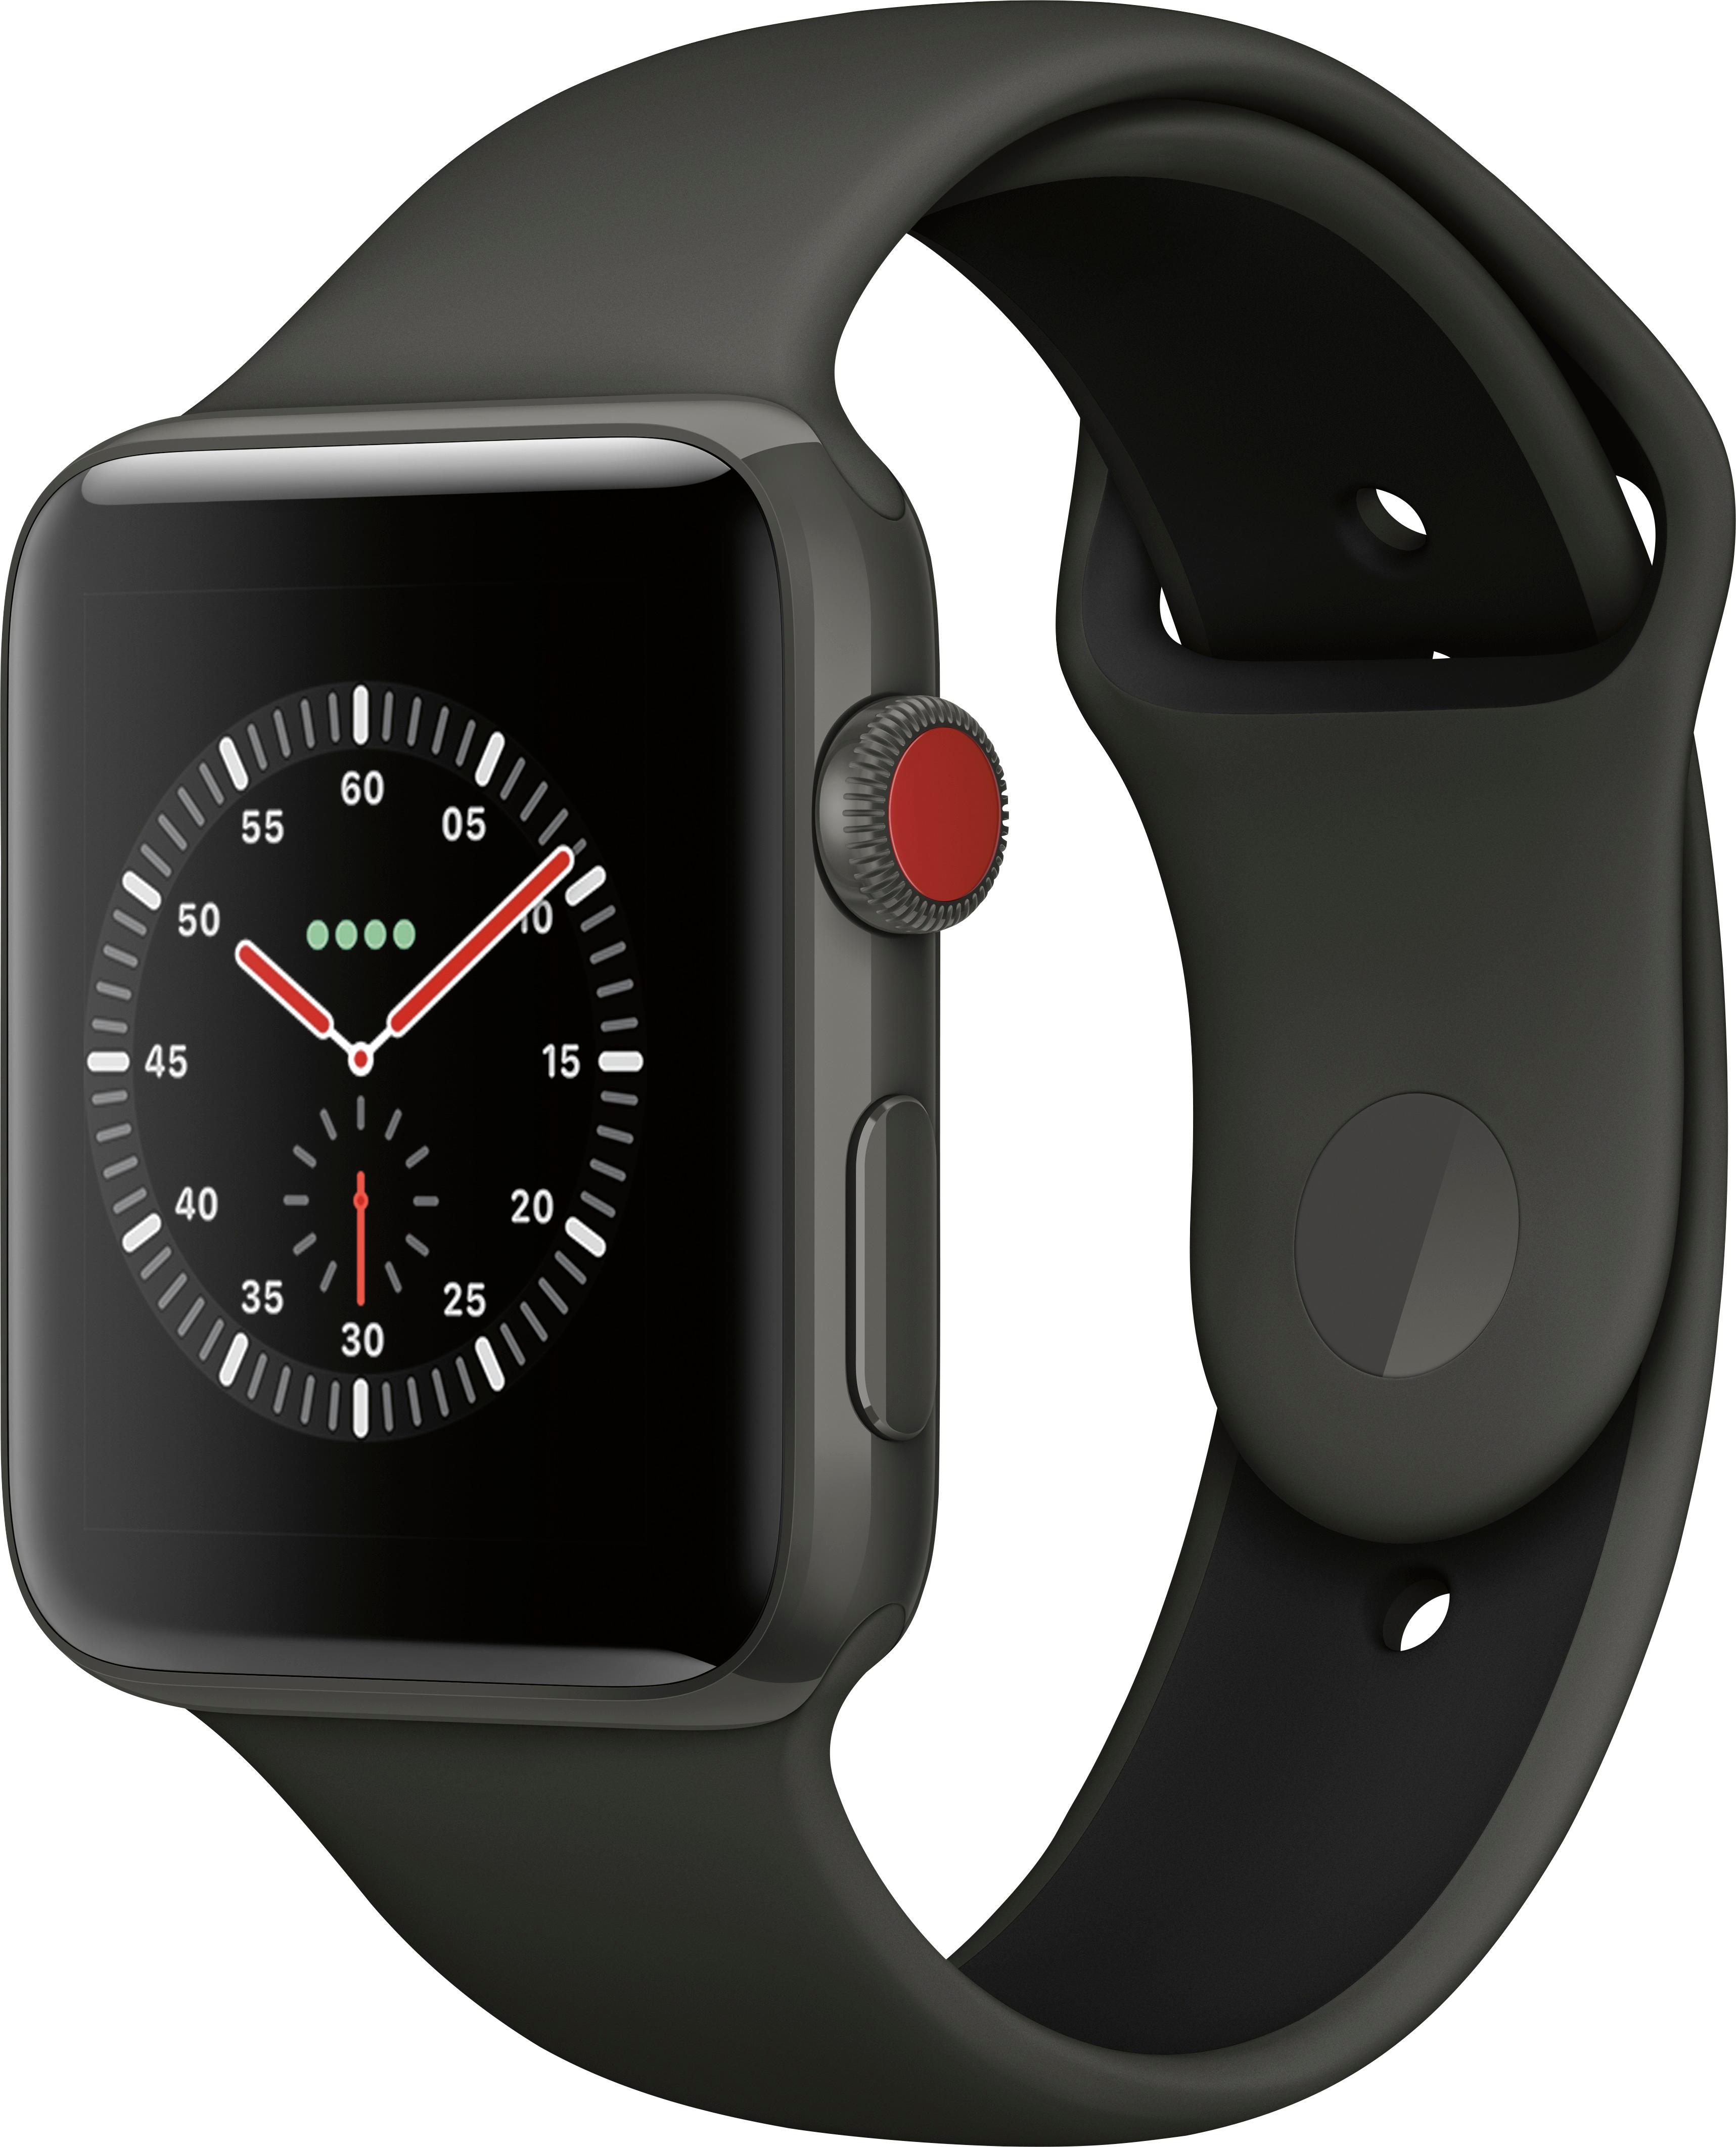 Angle View: Apple Watch Nike+ Series 3 (GPS + Cellular) 42mm Space Gray Aluminum Case with Anthracite/Black Nike Sport Band - Space Gray Aluminum